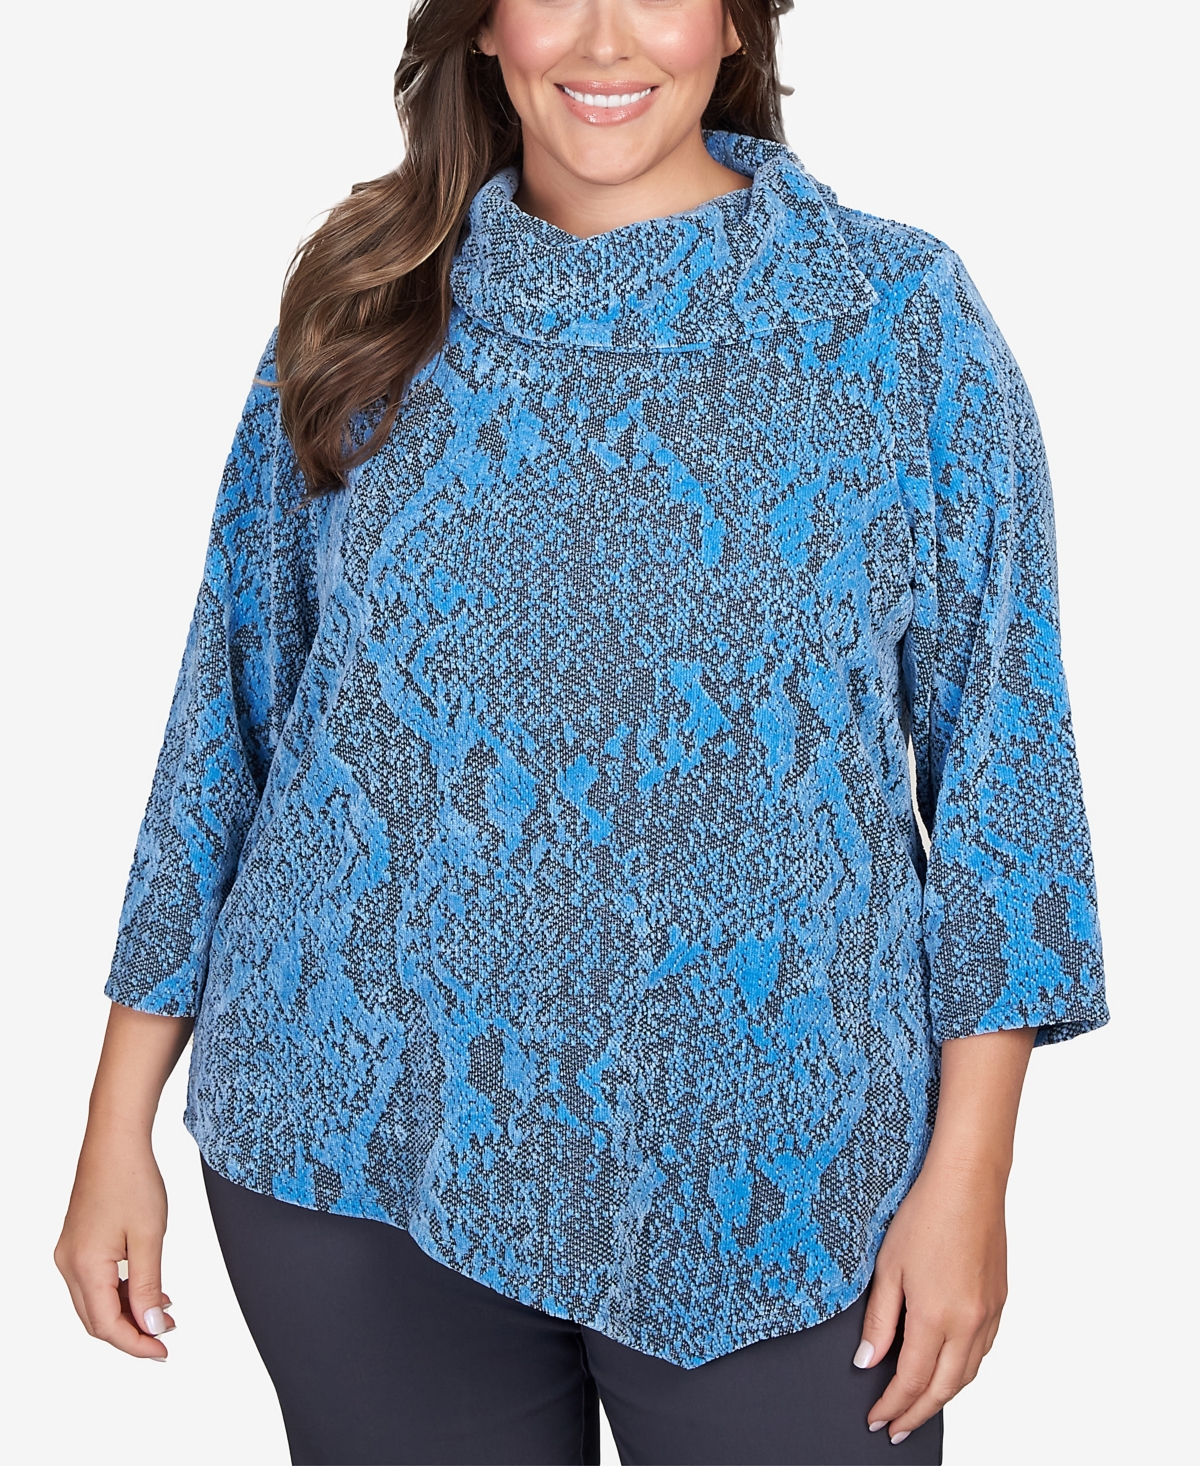 Ruby Rd. Plus Size Chenille Snakeskin Print Jacquard Top In French Blue Multi